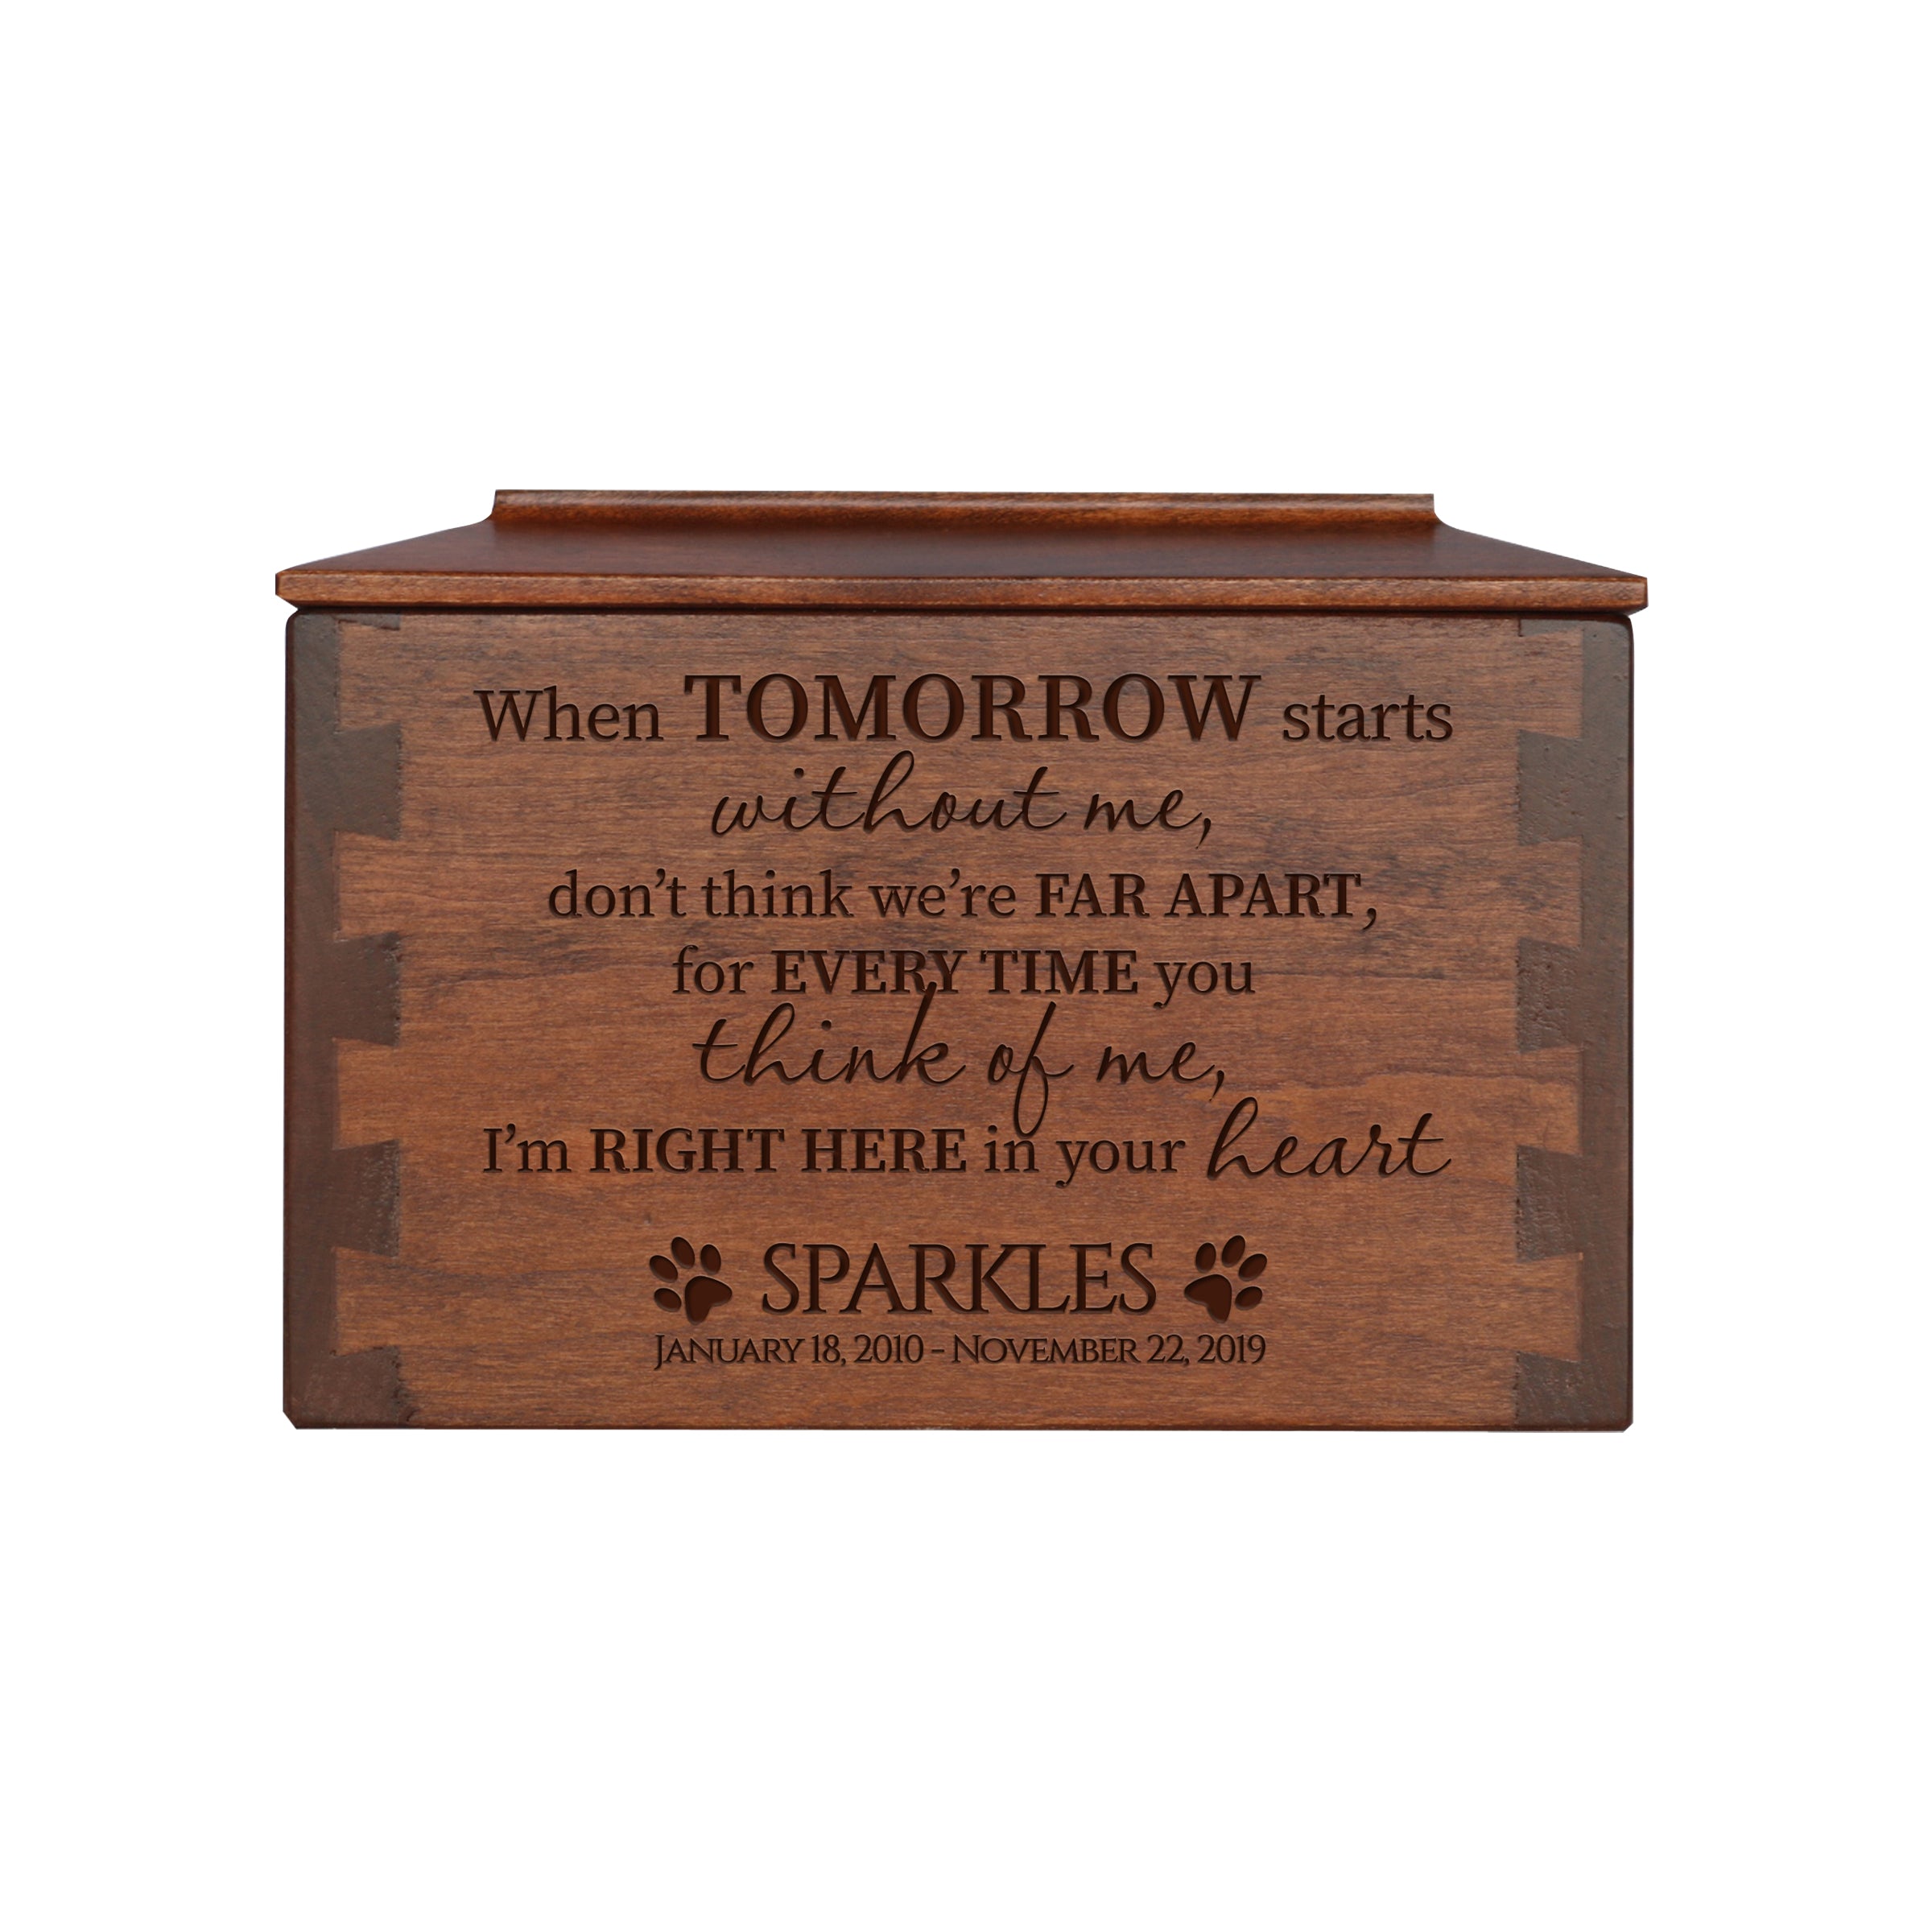 LifeSong Milestones Wooden Cremation Urn for Pets Small Cherry Dovetail Memorial Keepsake box for Dogs and Cats, personalized Memory box with Engraved, Name, Date and Poem Set D